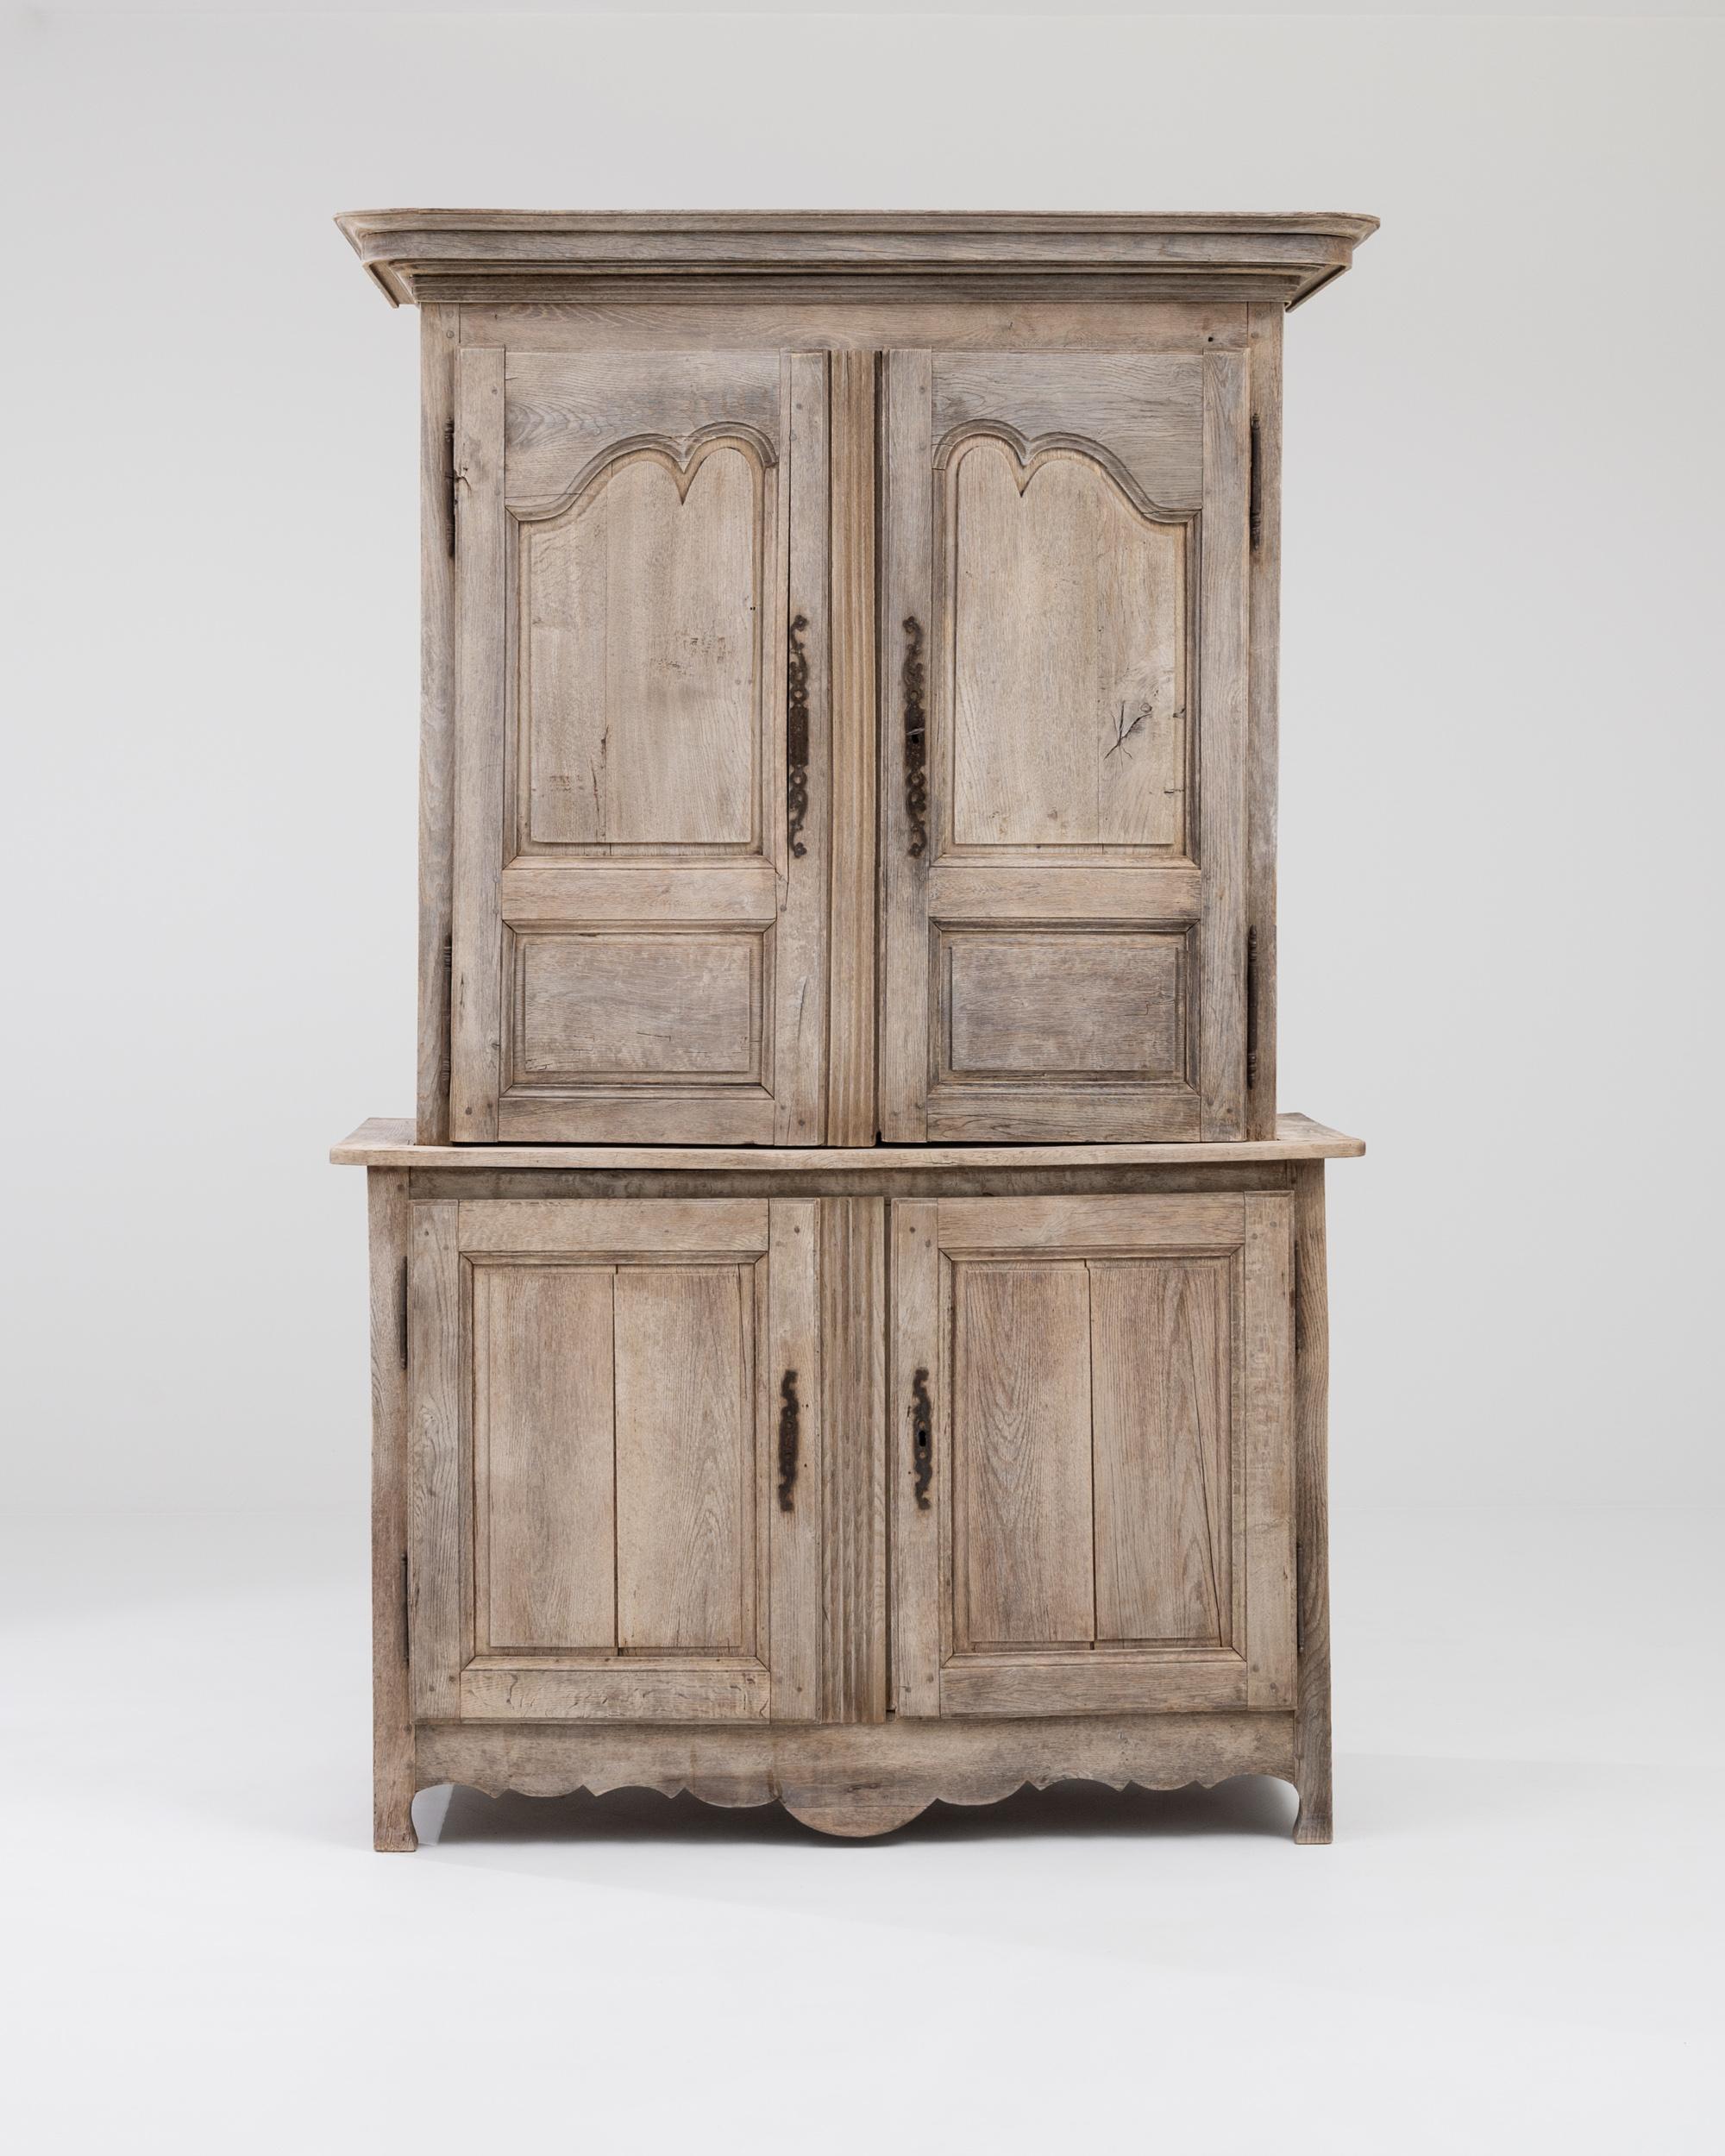 Despite the passing of the centuries, this antique Provincial cabinet in natural oak has retained every ounce of its vivacious charm. Made in France in the early 1800s, the swooping lines of the panels on the upper doors bring a touch of Rococo